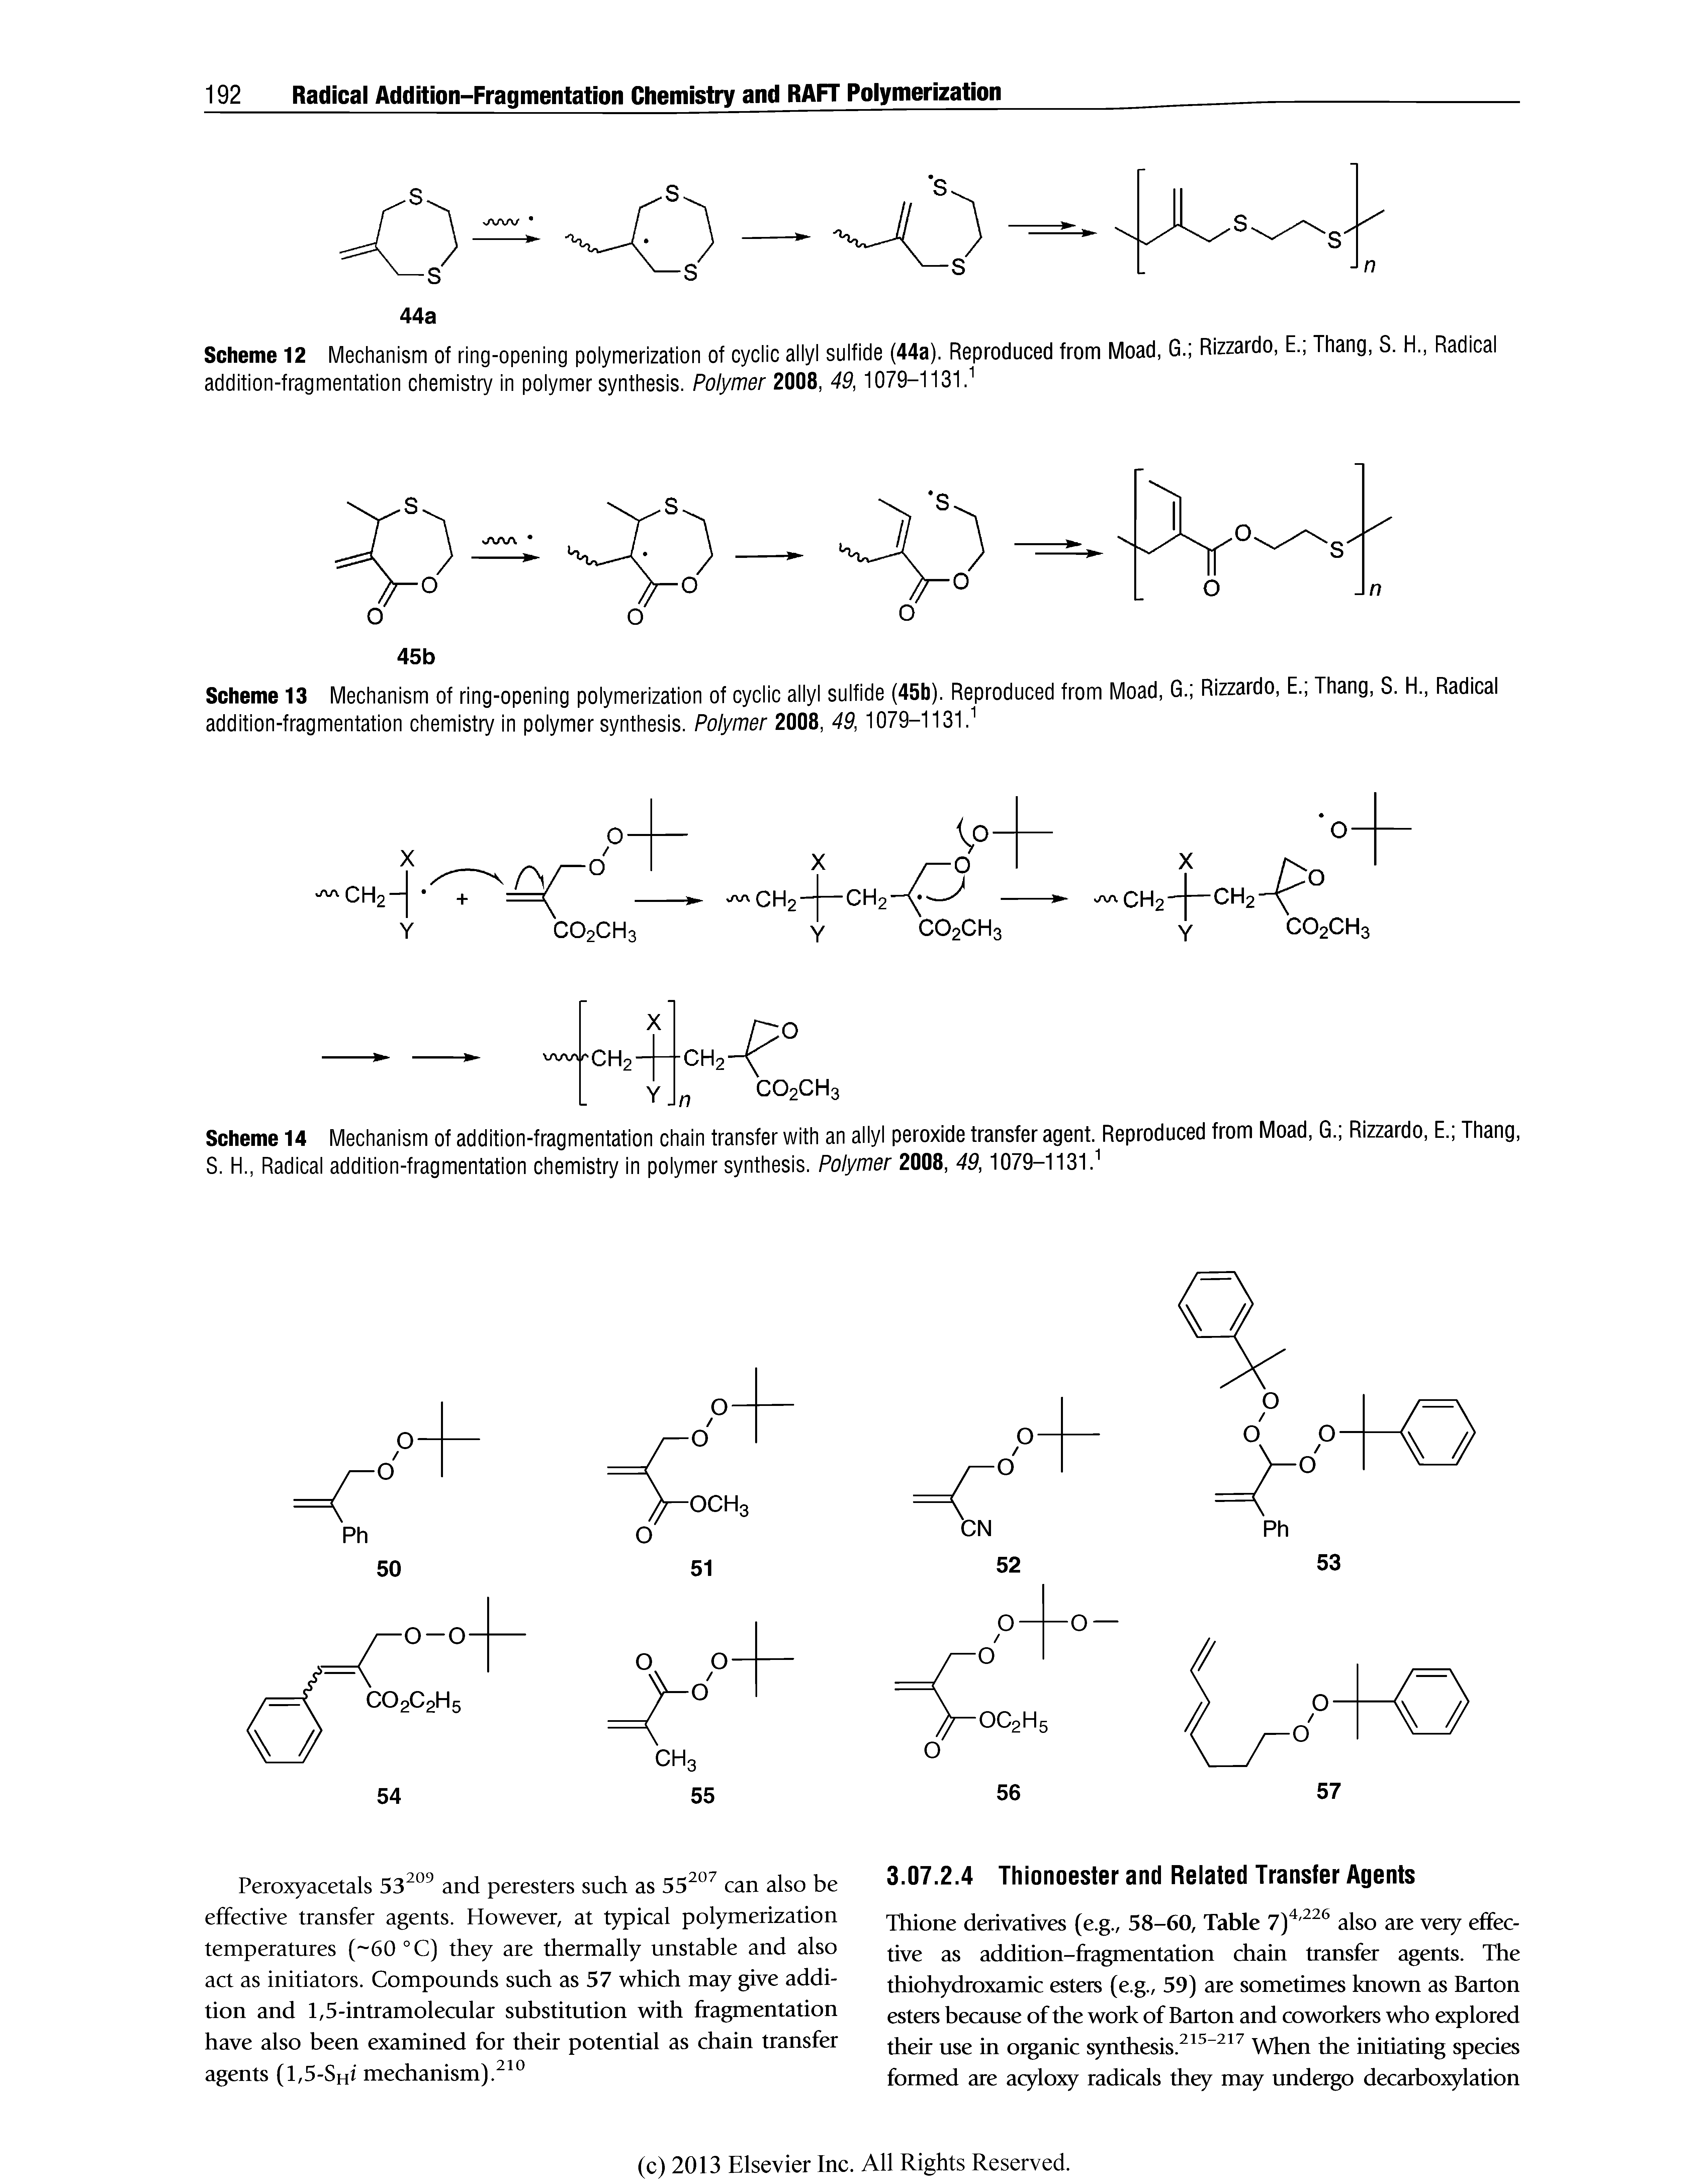 Scheme 14 Mechanism of addition-fragmentation chain transfer with an allyl peroxide transfer agent. Reproduced from Moad, G. Rizzardo, E. Thang, S. H., Radical addition-fragmentation chemistry in polymer synthesis. Polymer 2008, 49,1079-1131." ...